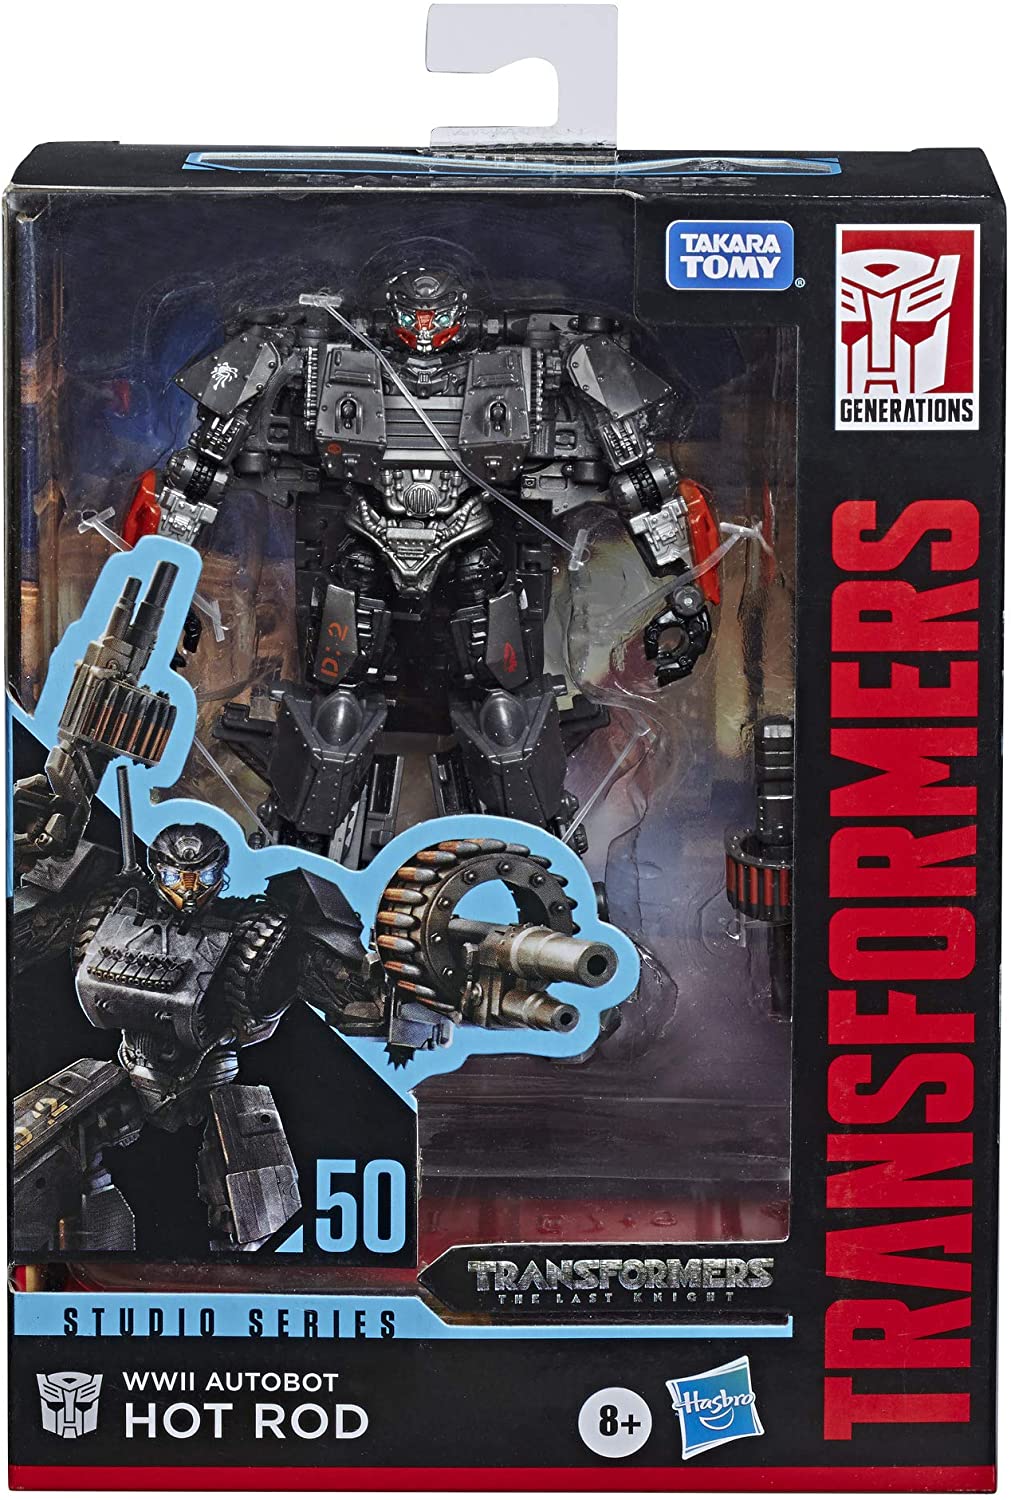 Transformers Toys Studio Series 50 Deluxe Transformers The Last Knight Movi